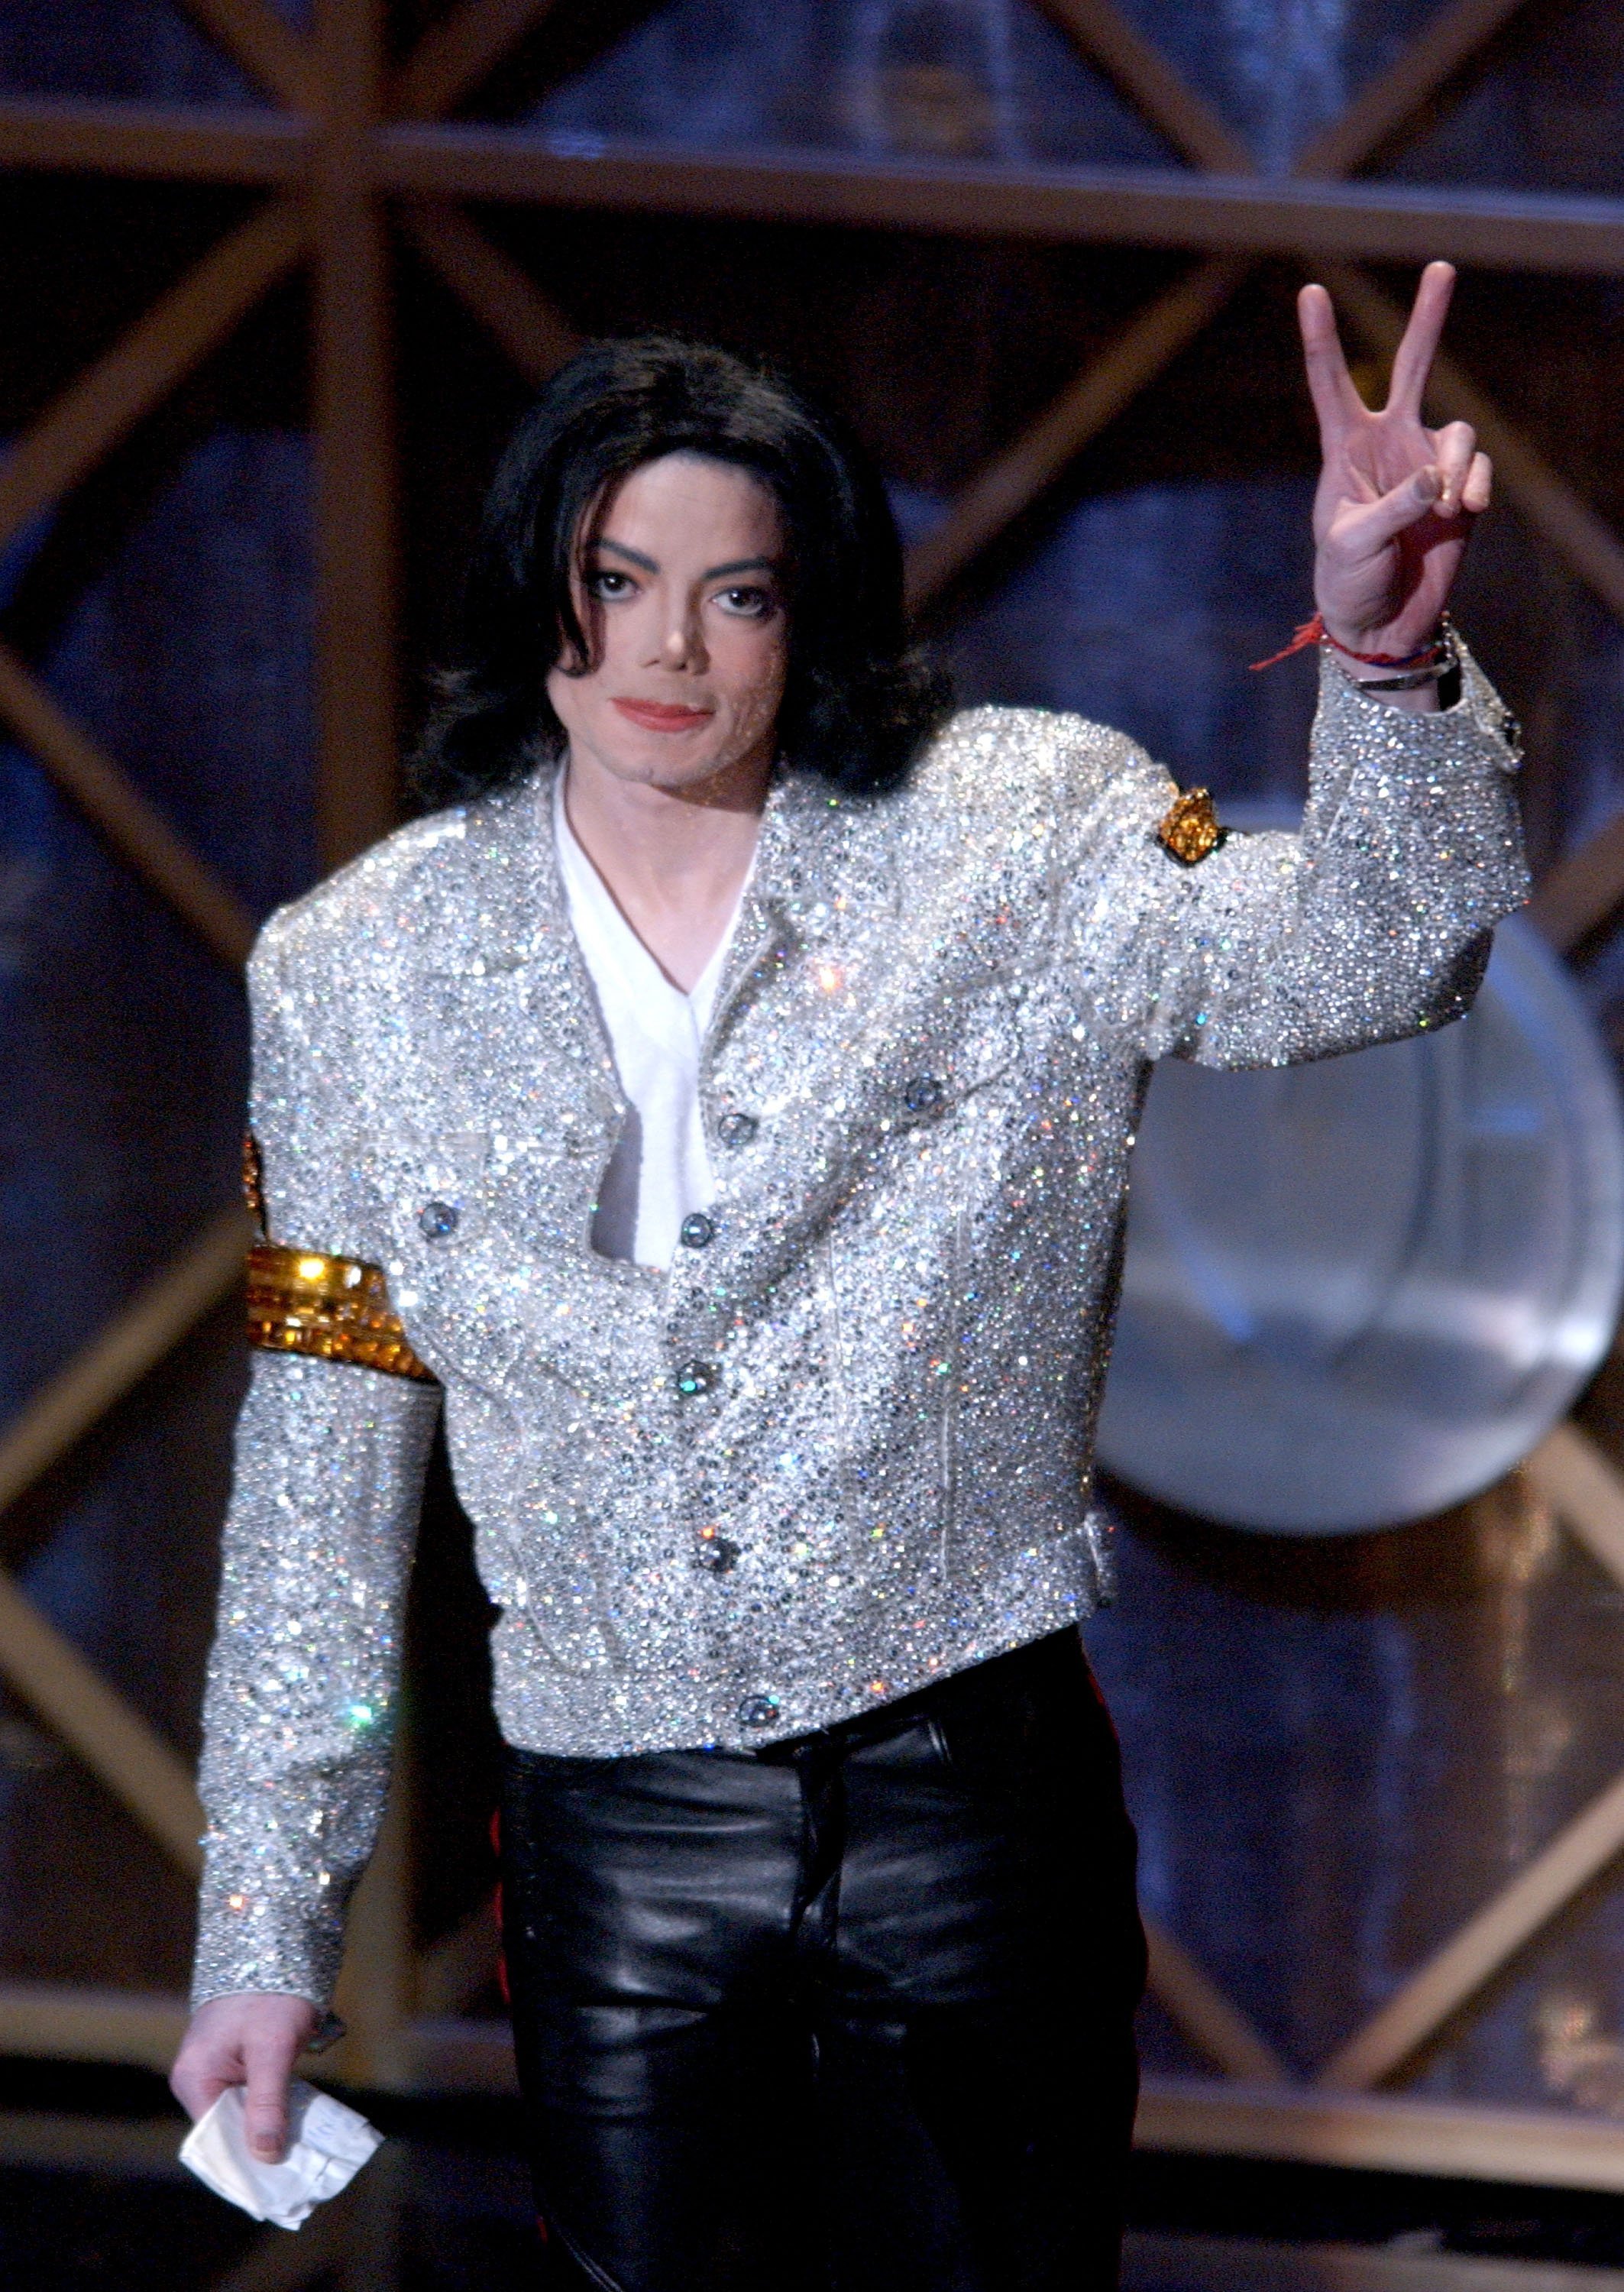 Michael Jackson at the 29th Annual American Music Awards at the Shrine Auditorium on Jan. 9, 2002 in Los Angeles. | Photo: Getty Images